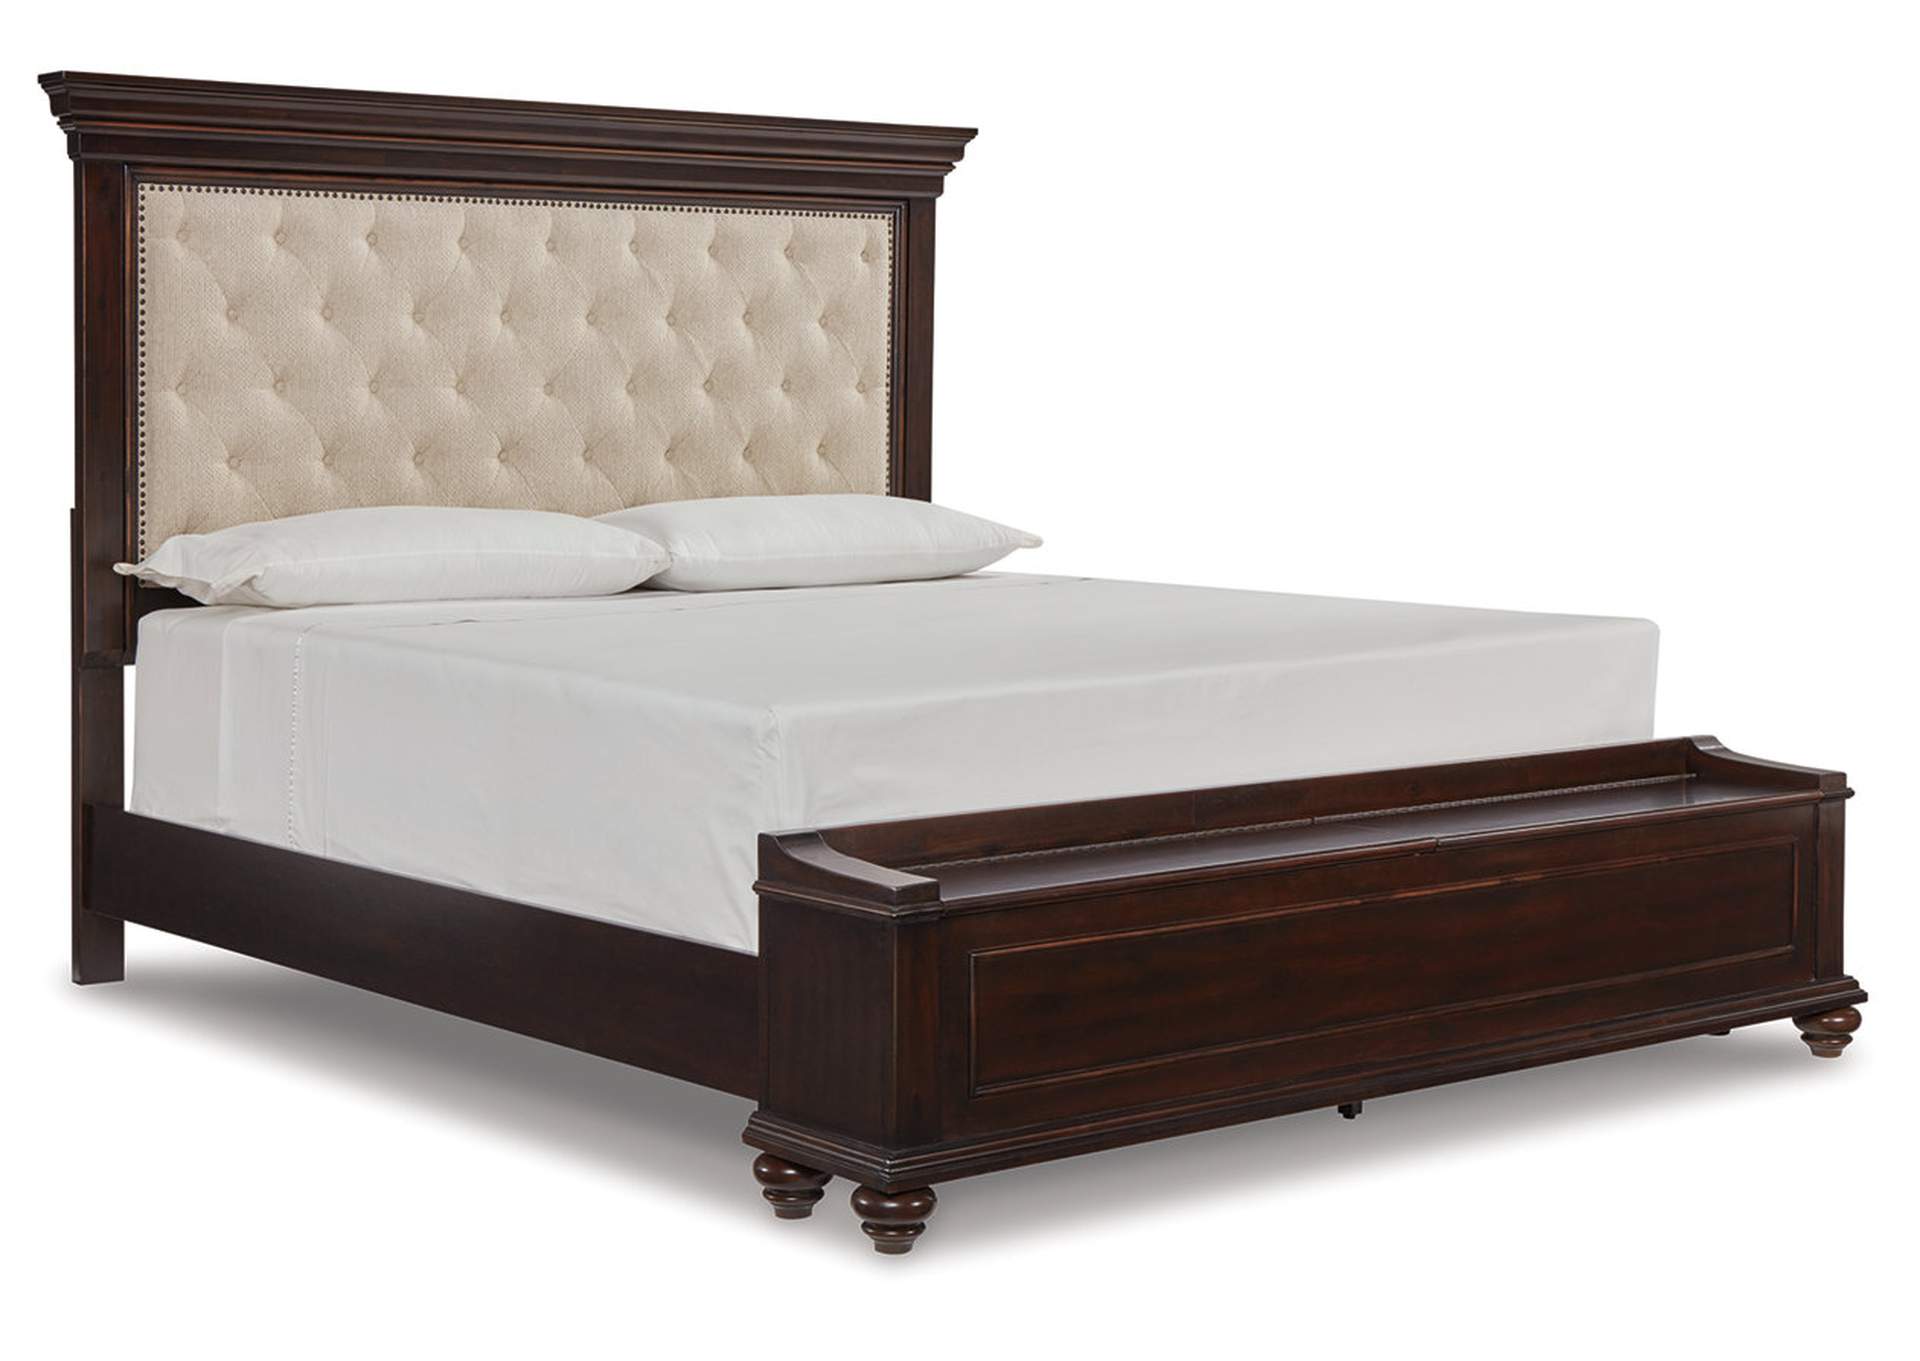 Brynhurst California King Upholstered Bed with Storage Bench,Signature Design By Ashley